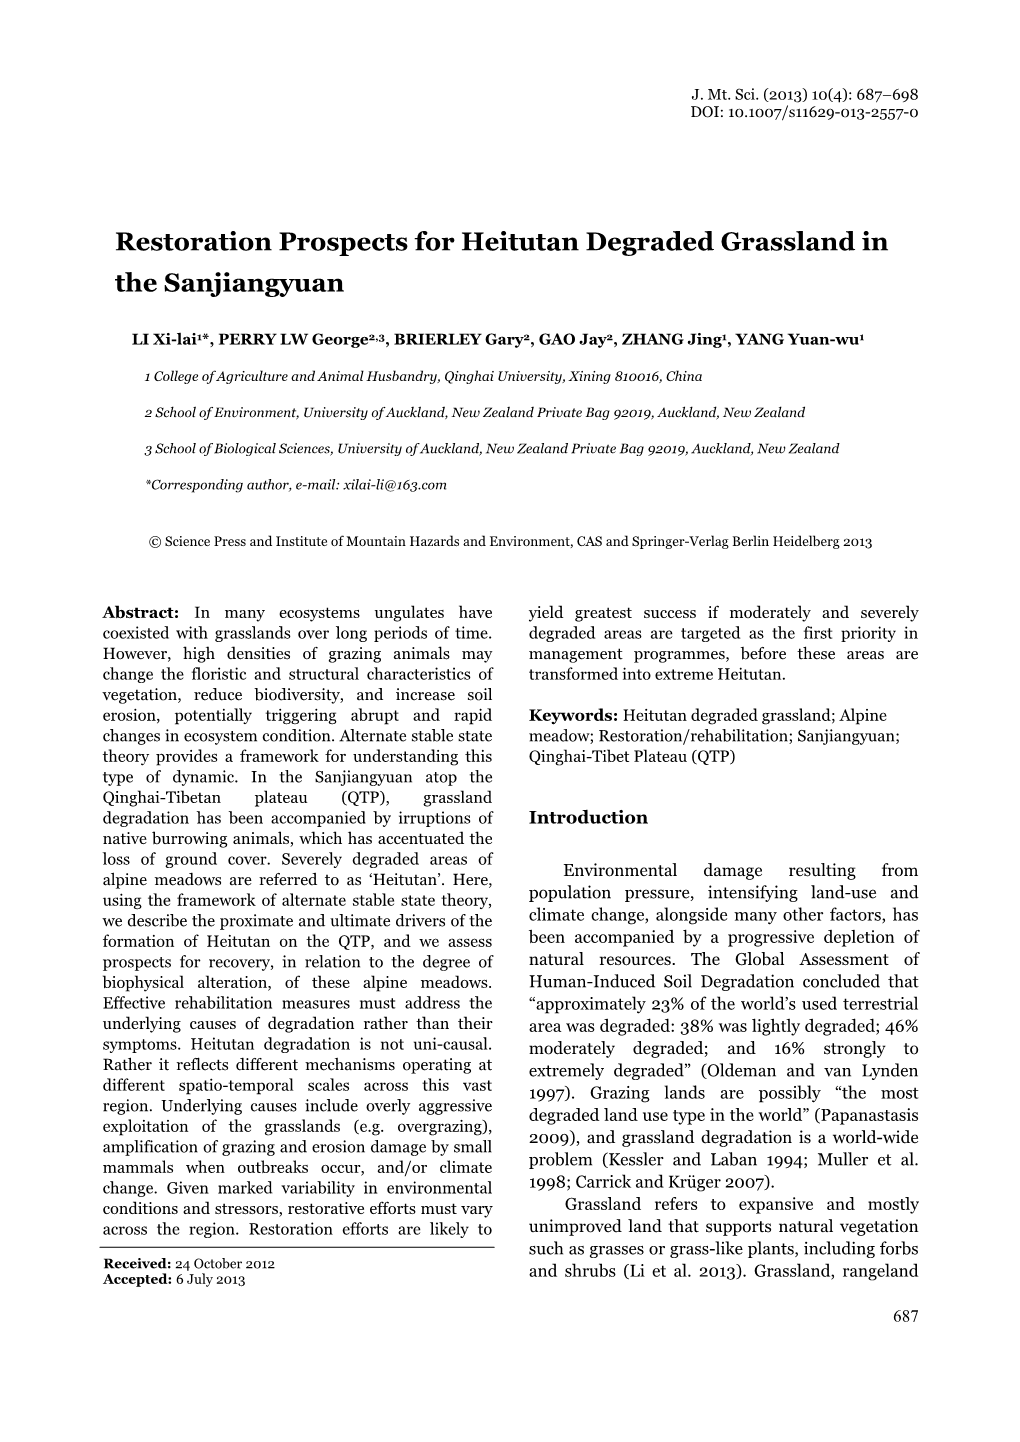 Restoration Prospects for Heitutan Degraded Grassland in the Sanjiangyuan